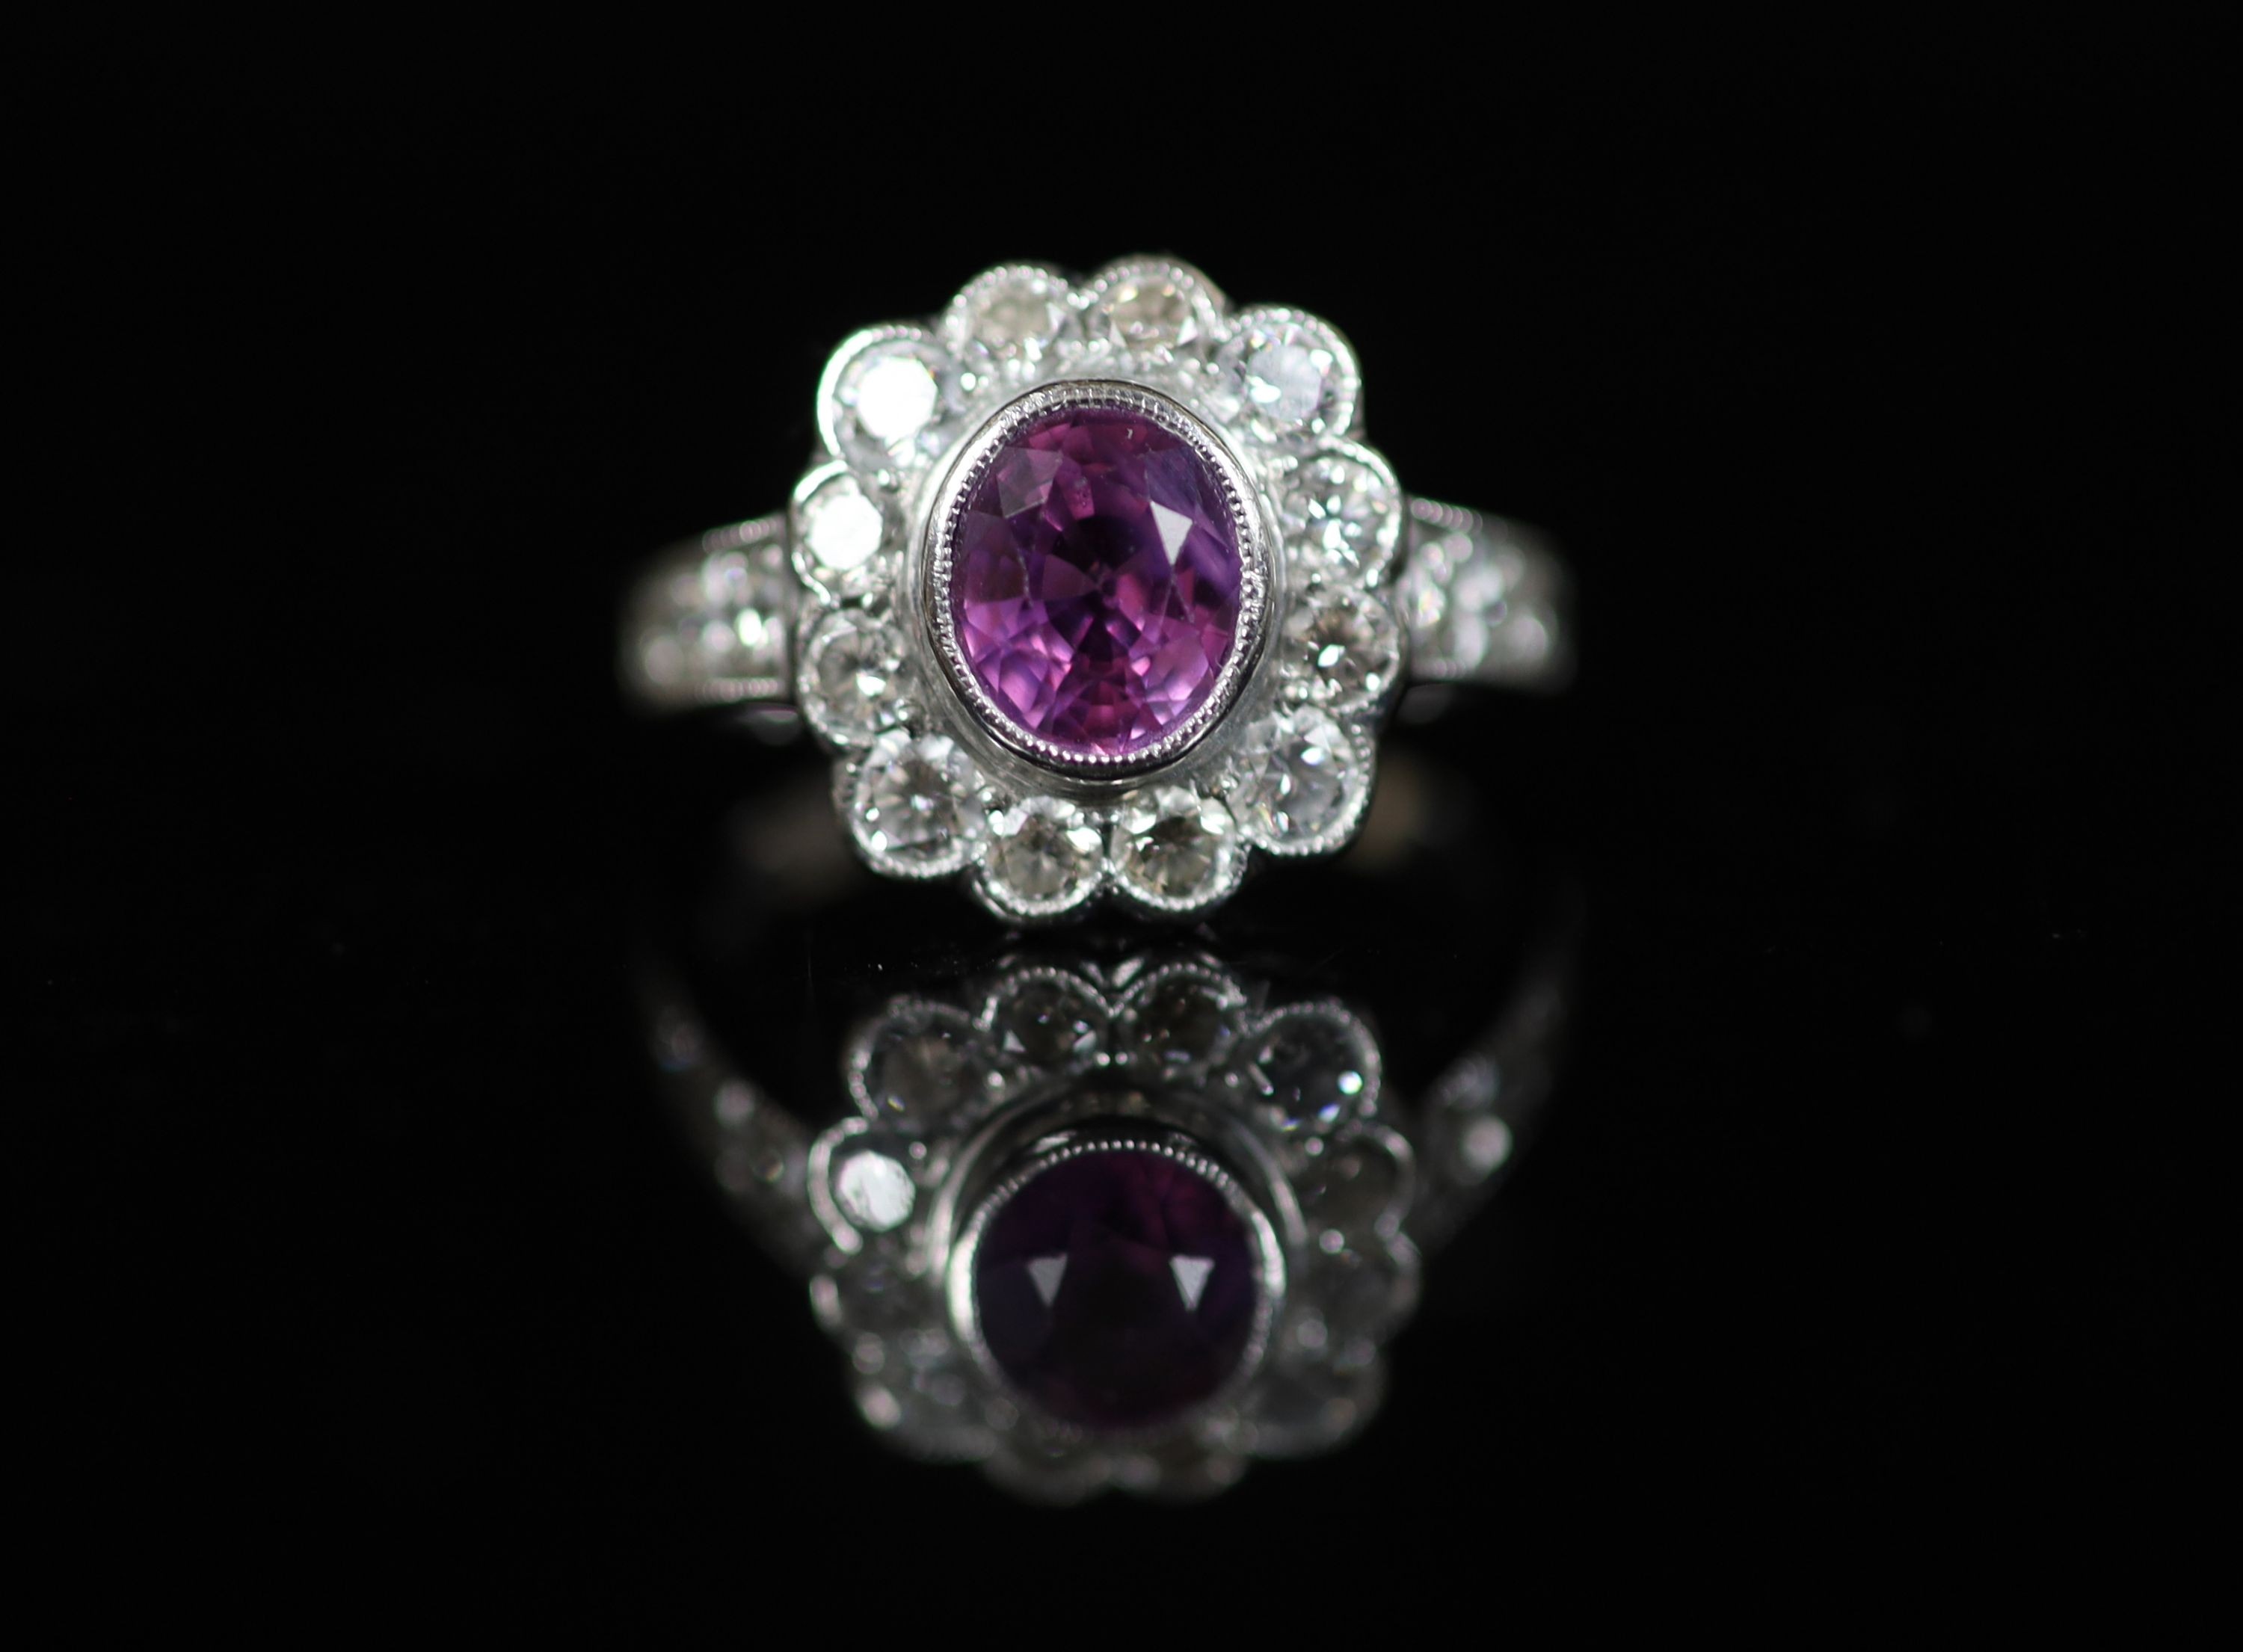 A modern 18ct white gold, pink sapphire and diamond cluster ring